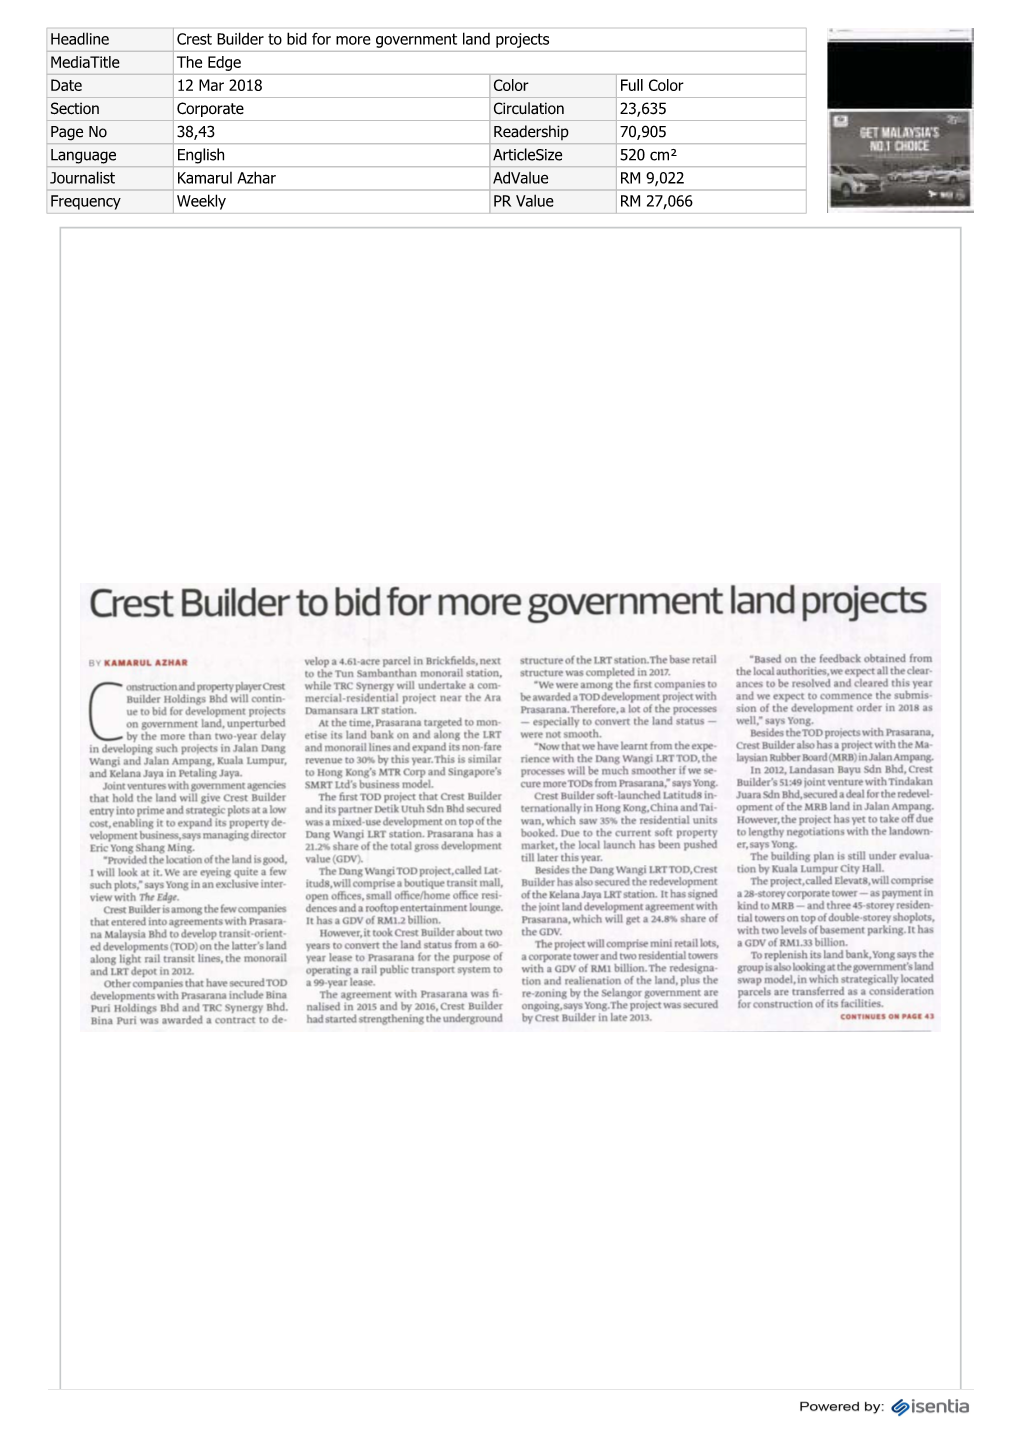 Crest Builder to Bid for More Government Land Projects